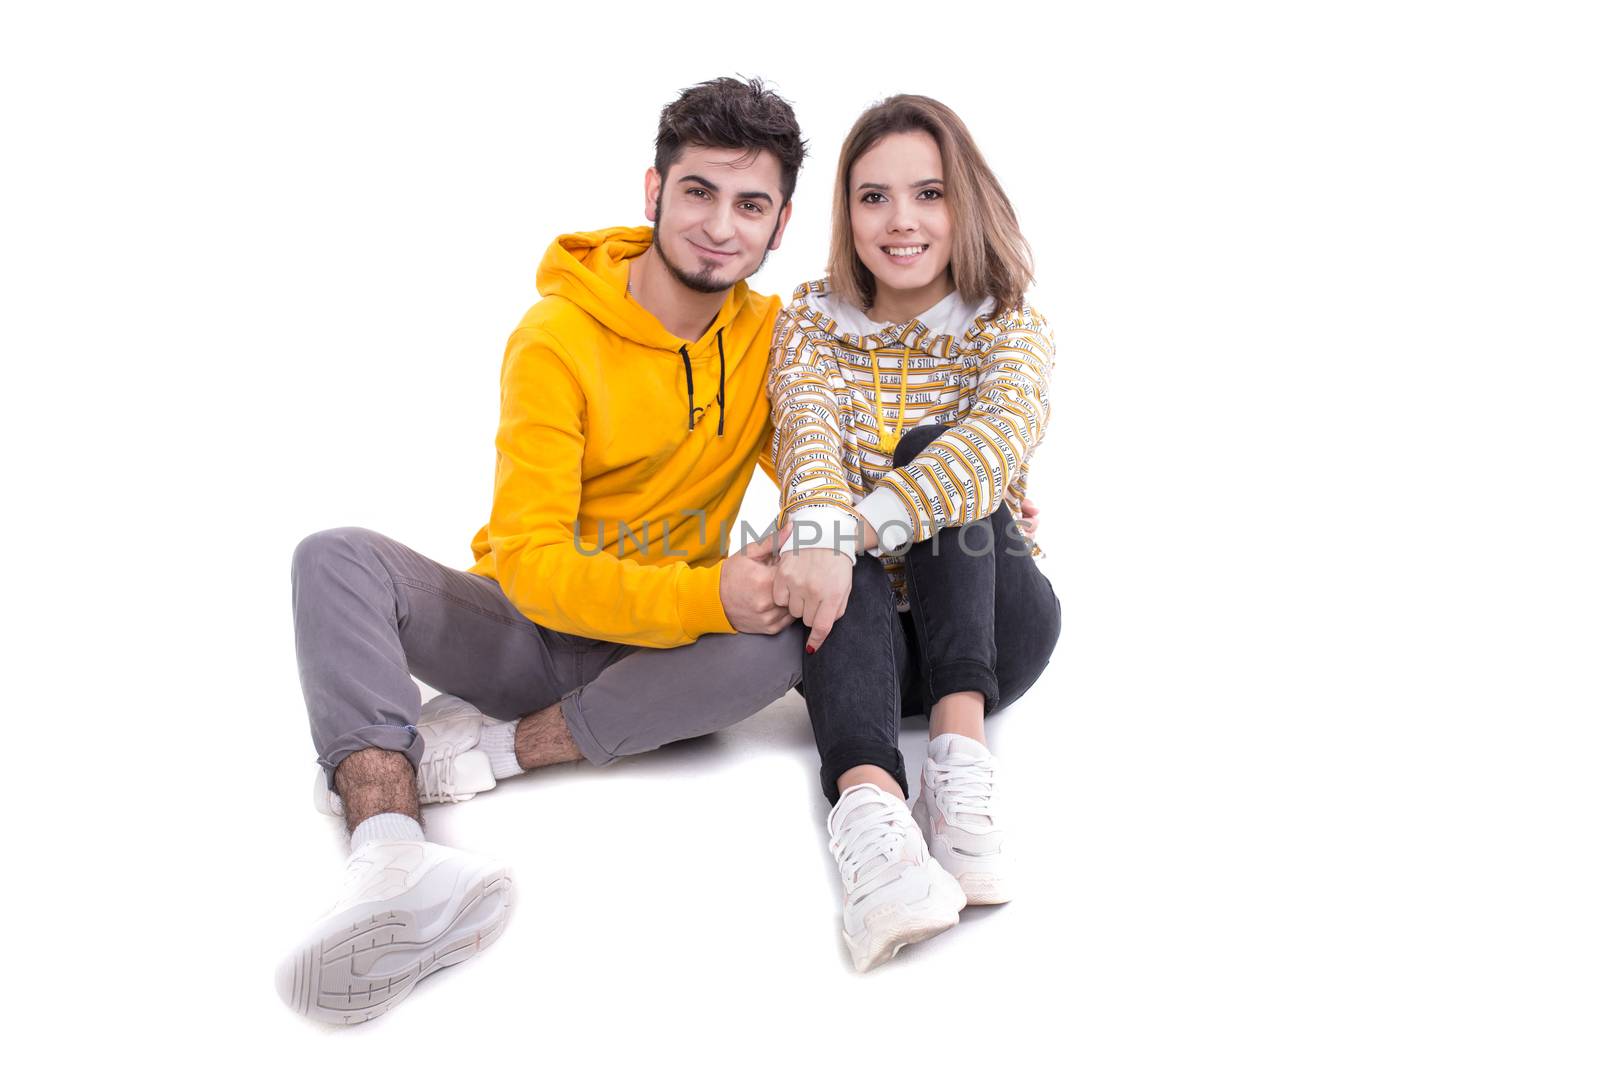 Smiling couple in yellow sitting on white in studio